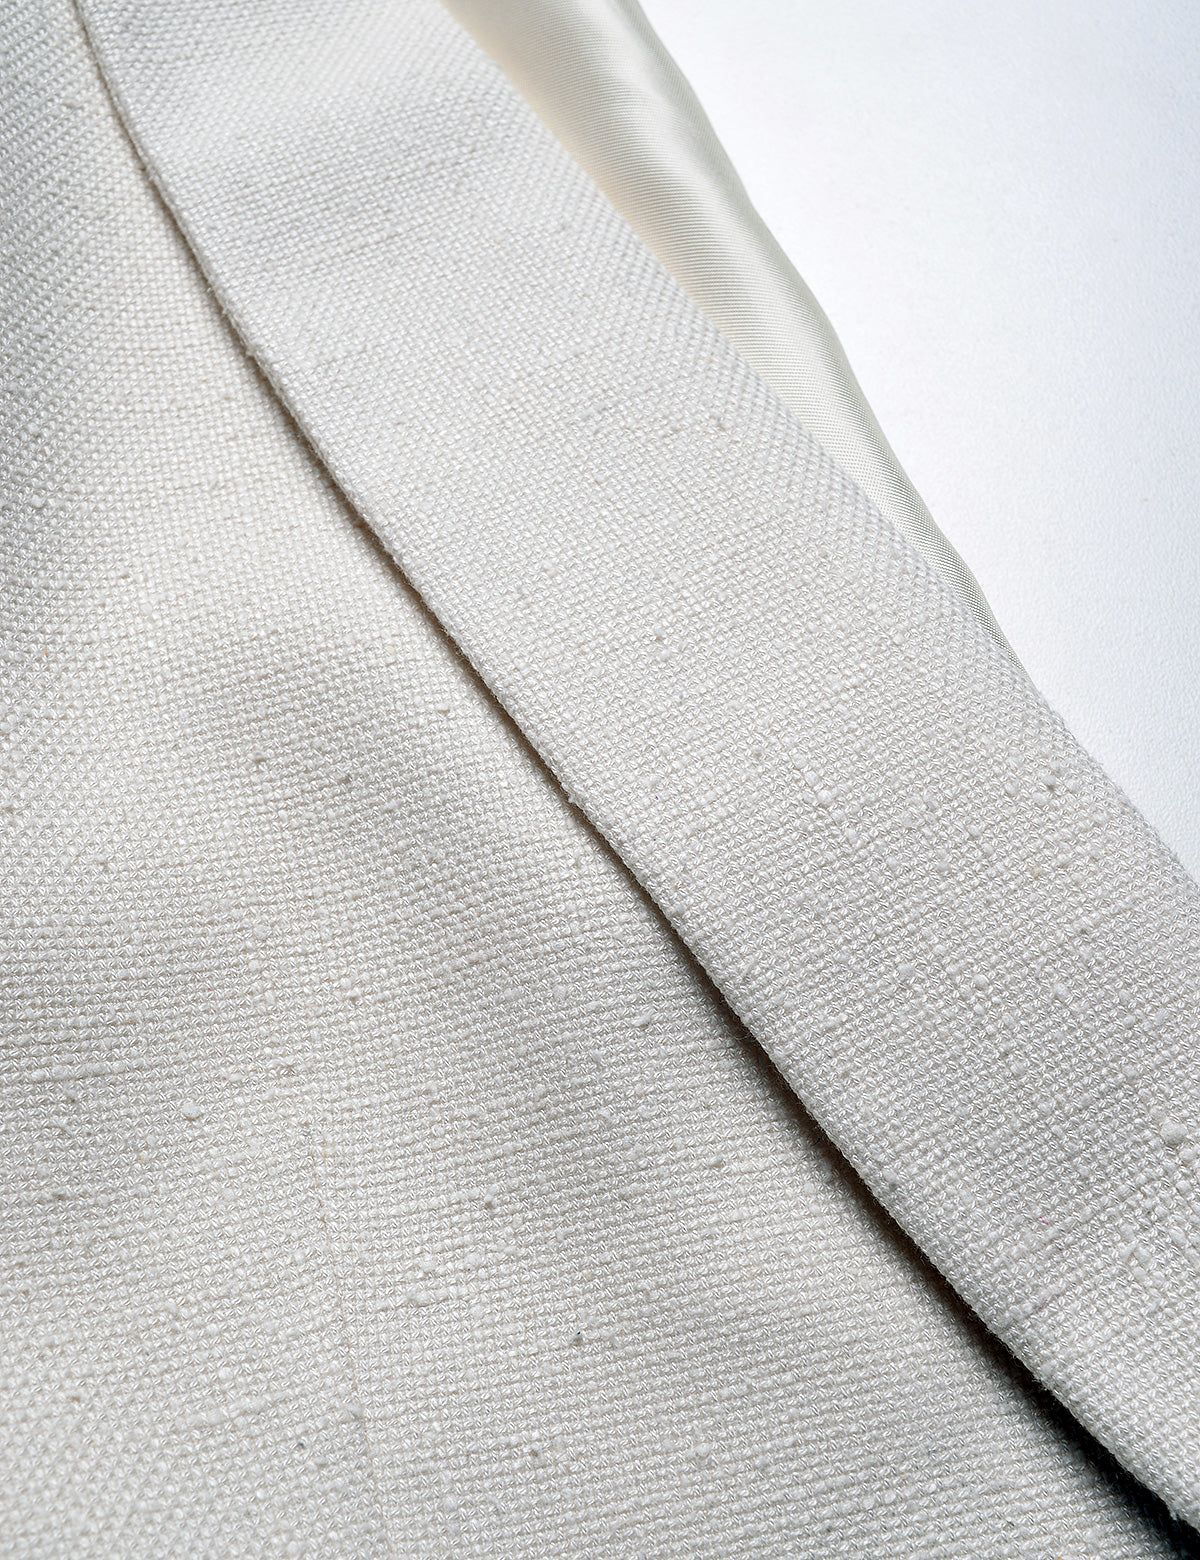 Detail shot of Brooklyn Tailors BKT50 Shawl Collar Dinner Jacket in Silk & Wool Hopsack - Ivory showing the lapel and fabric texture